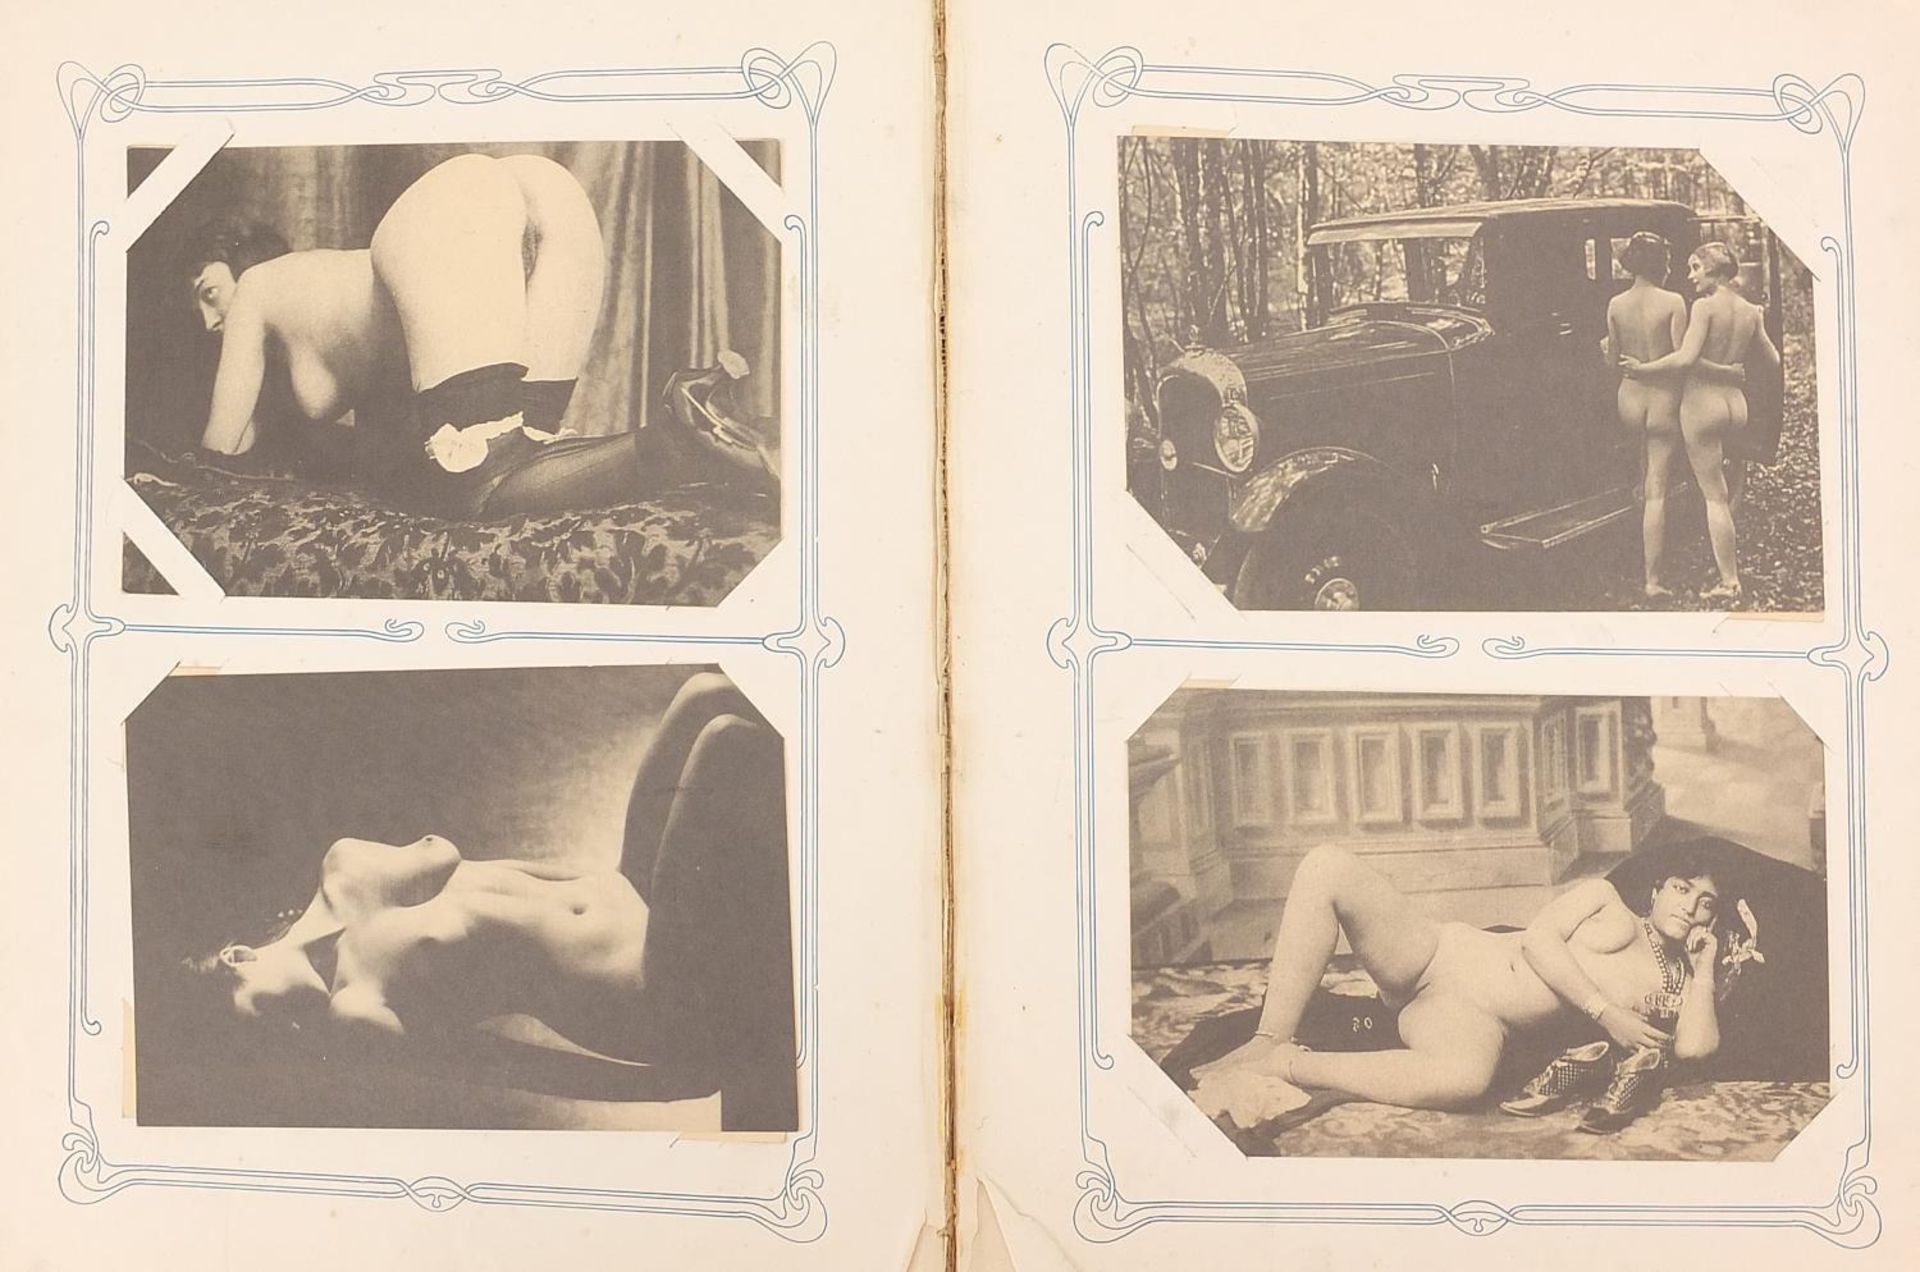 Collection of erotic and fetish postcards arranged in an album